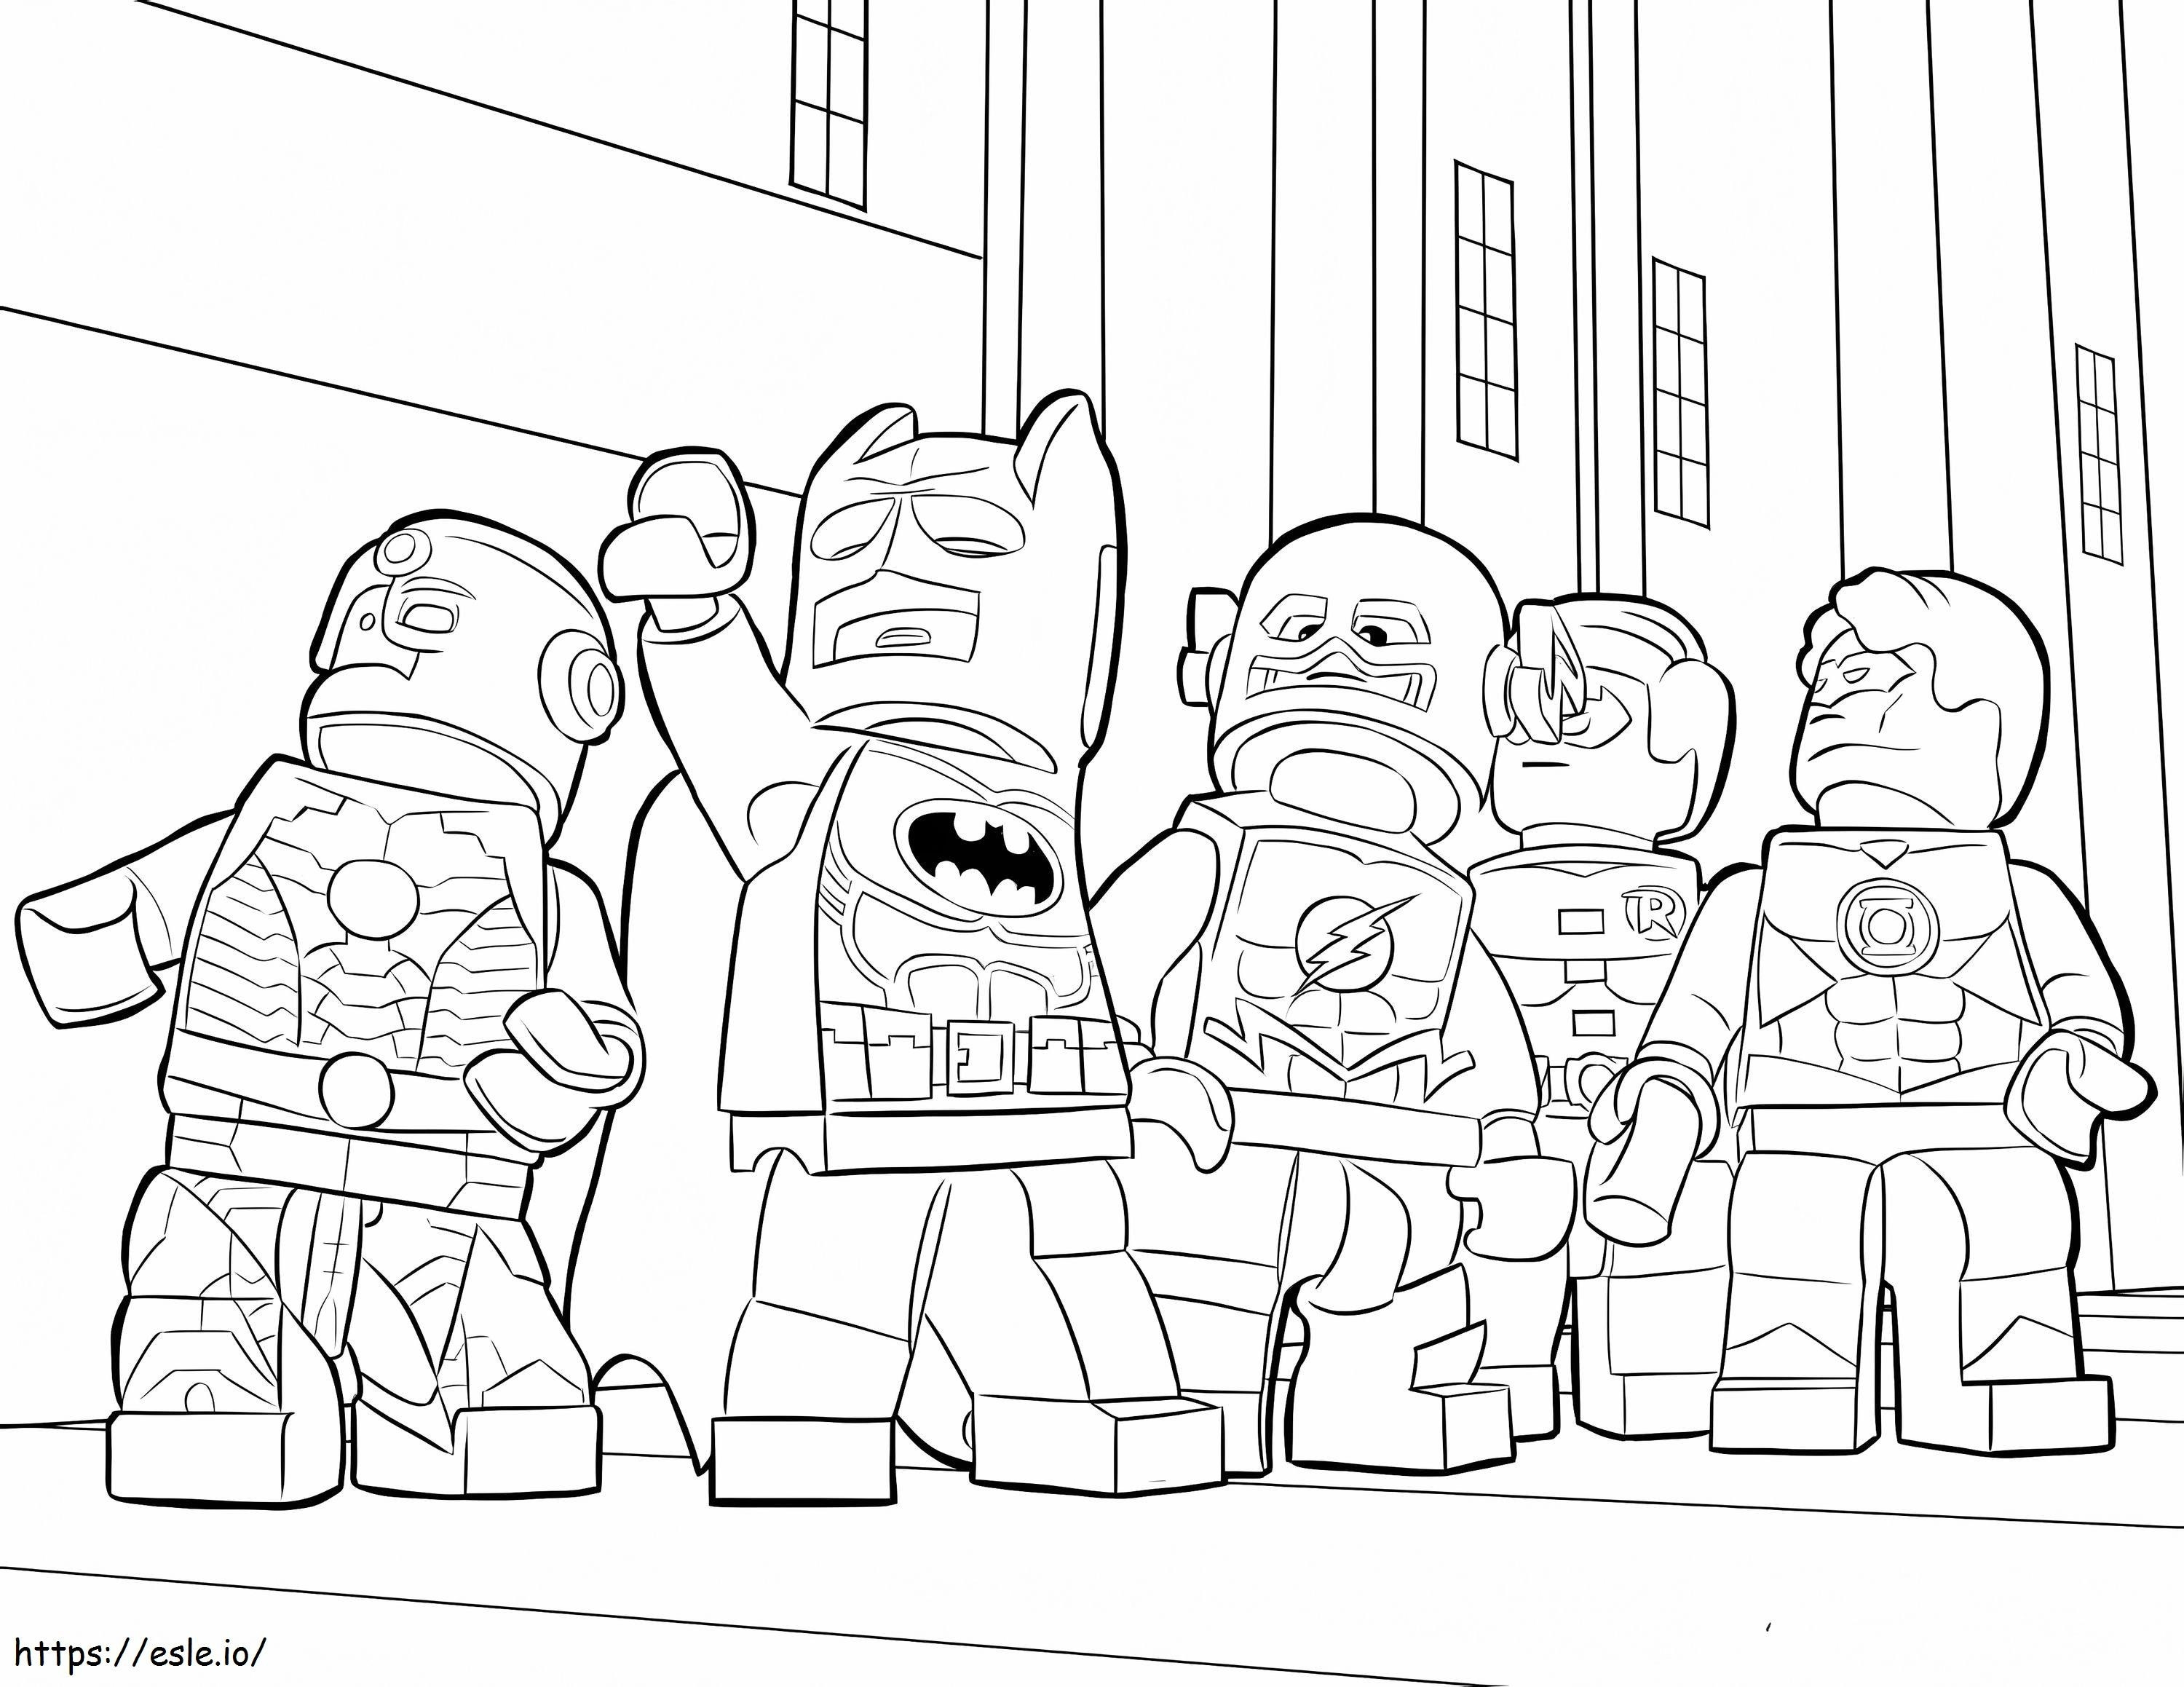 Lego Flash And Friends coloring page